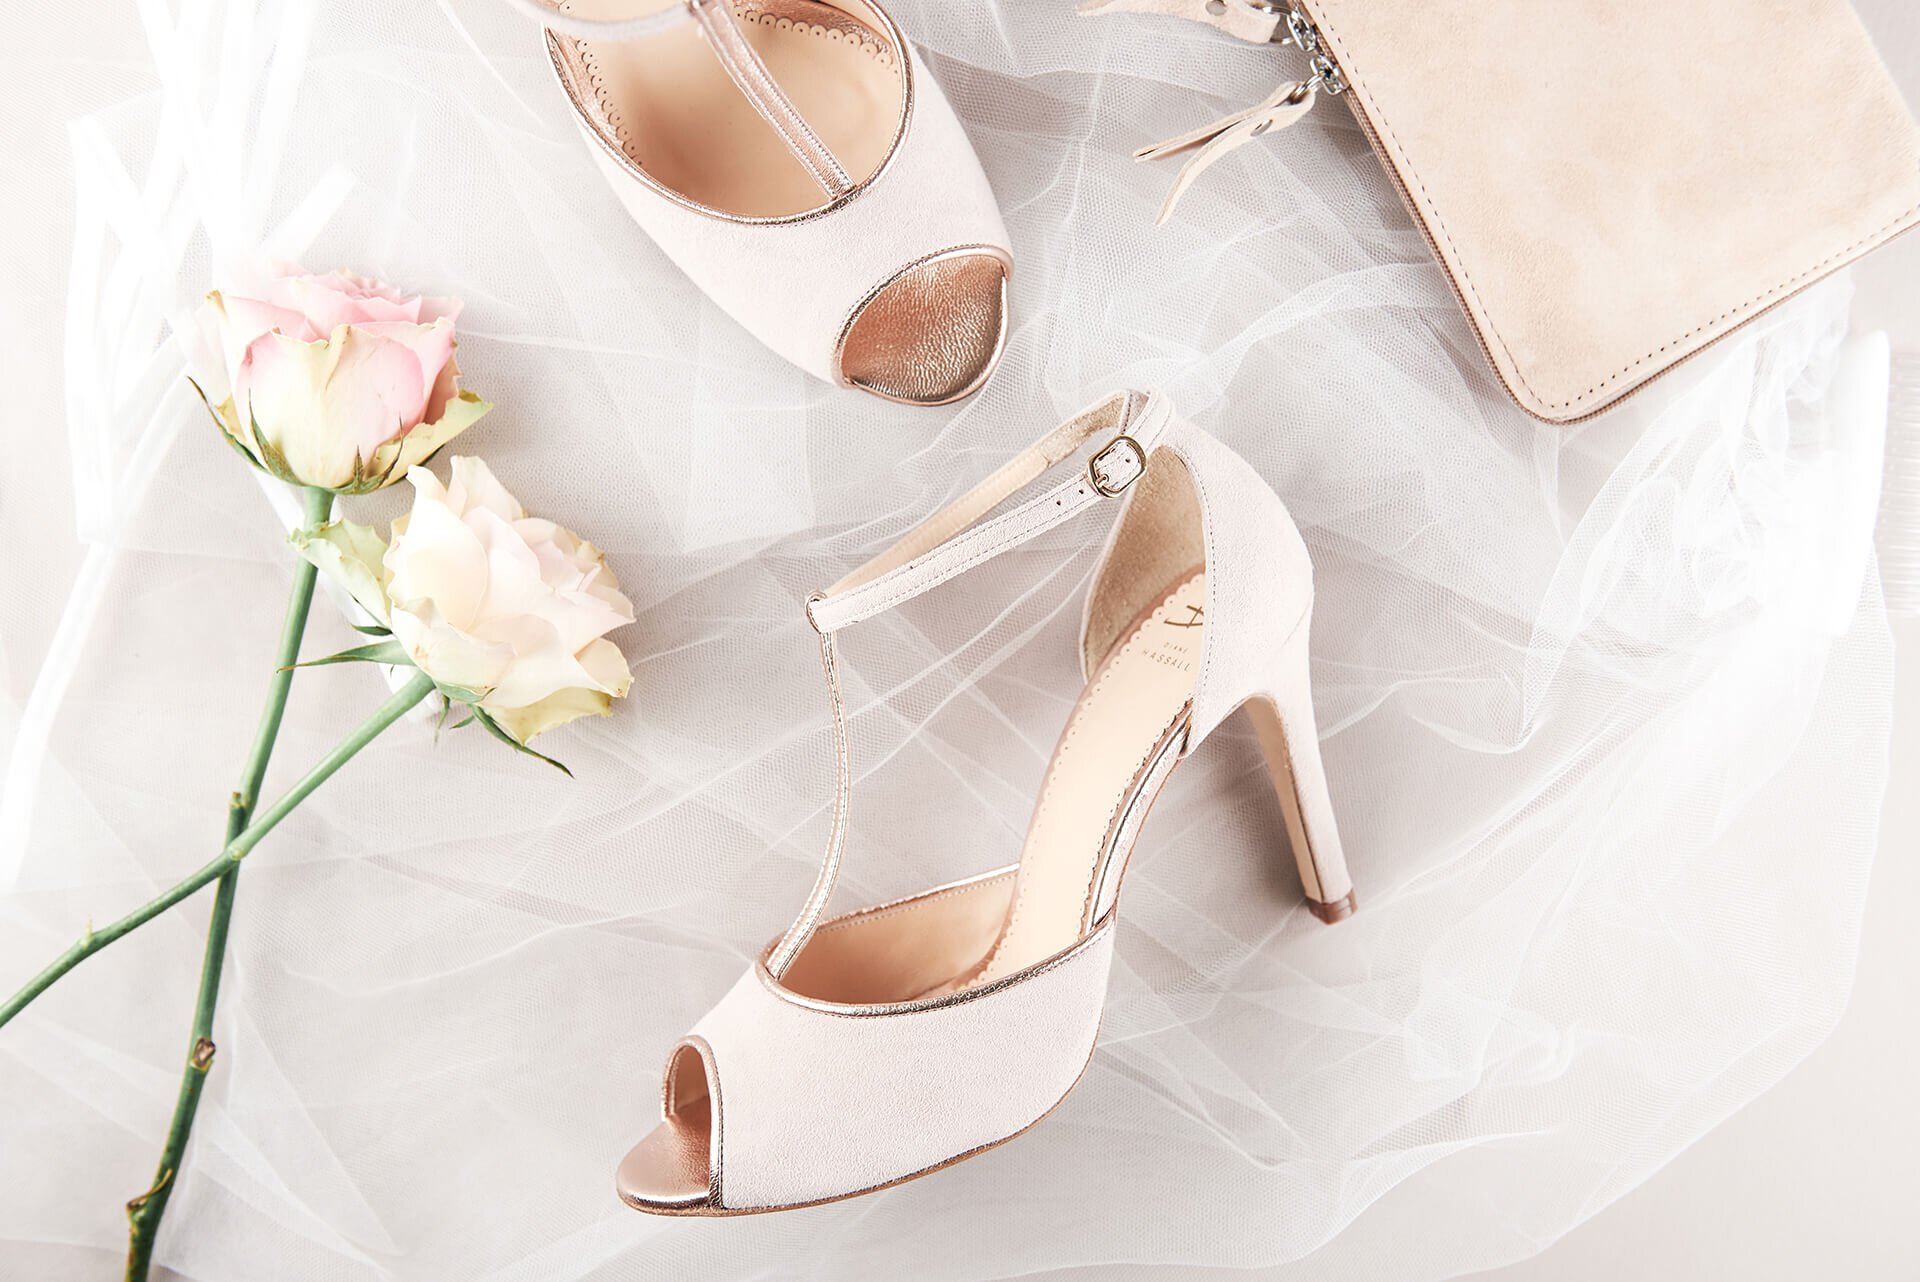 Di Hassall T-bar wedding shoes in nude suede with rose gold piping